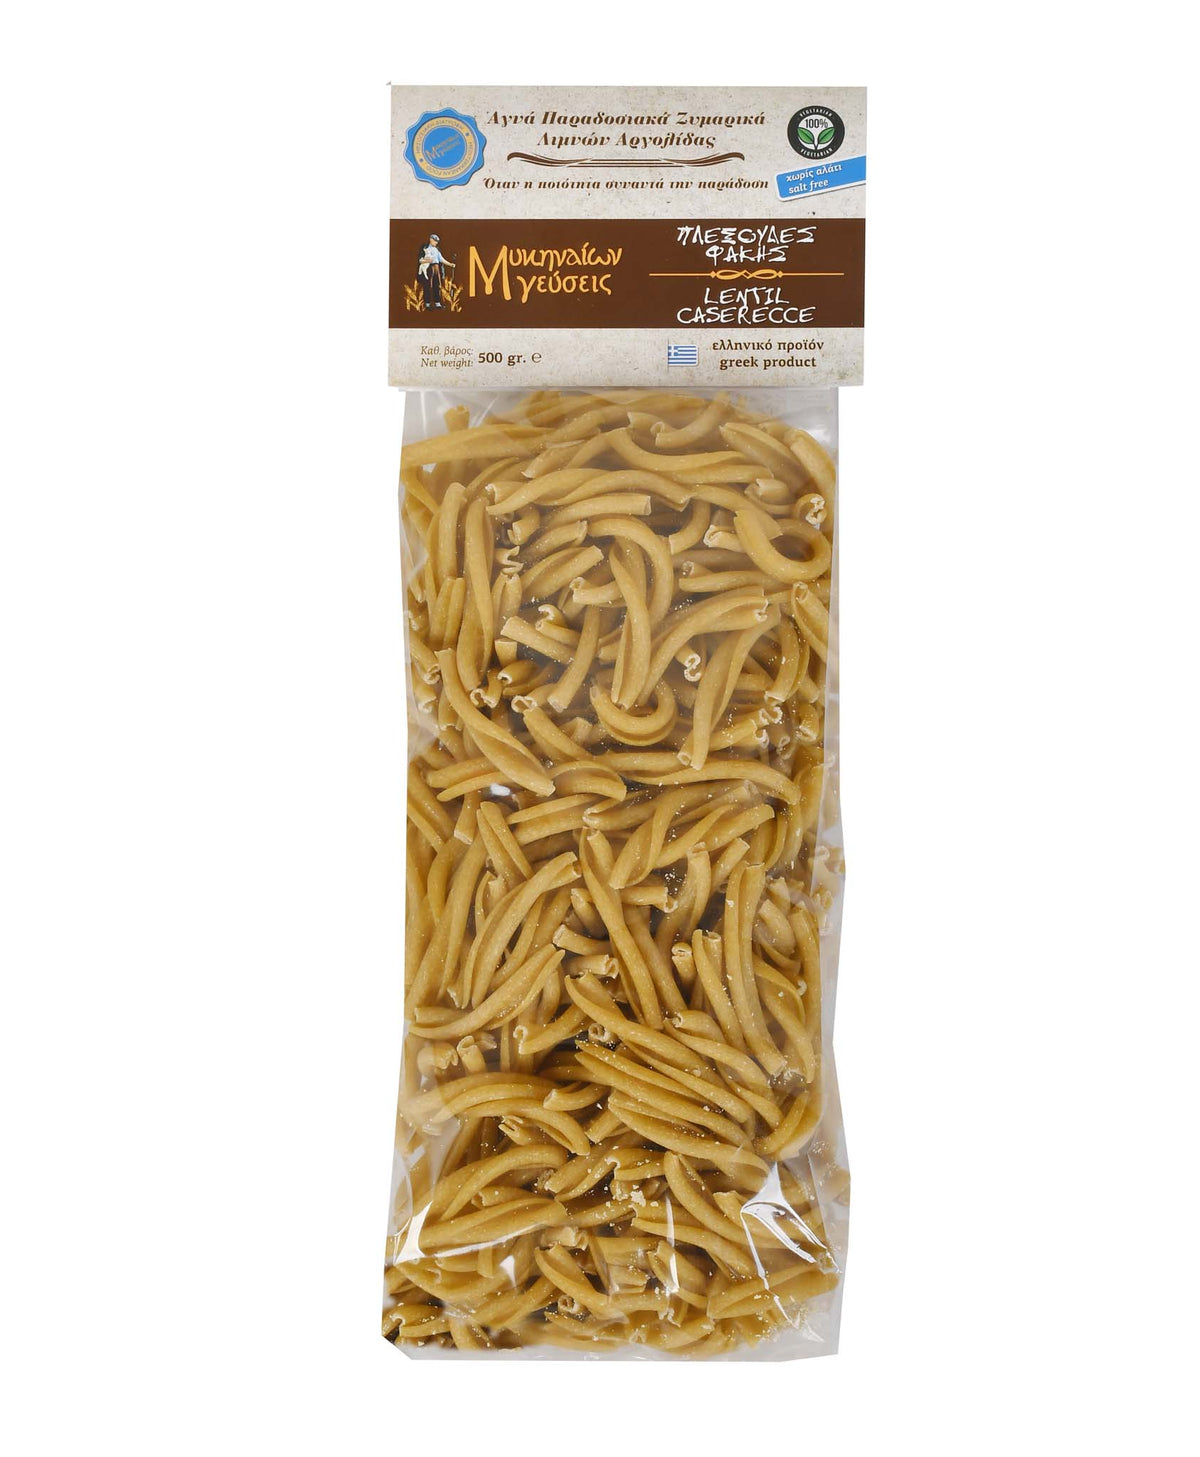 Front of package of Mikinaion Gefsis Caserecce with Lentil, Onion and Garlic pasta